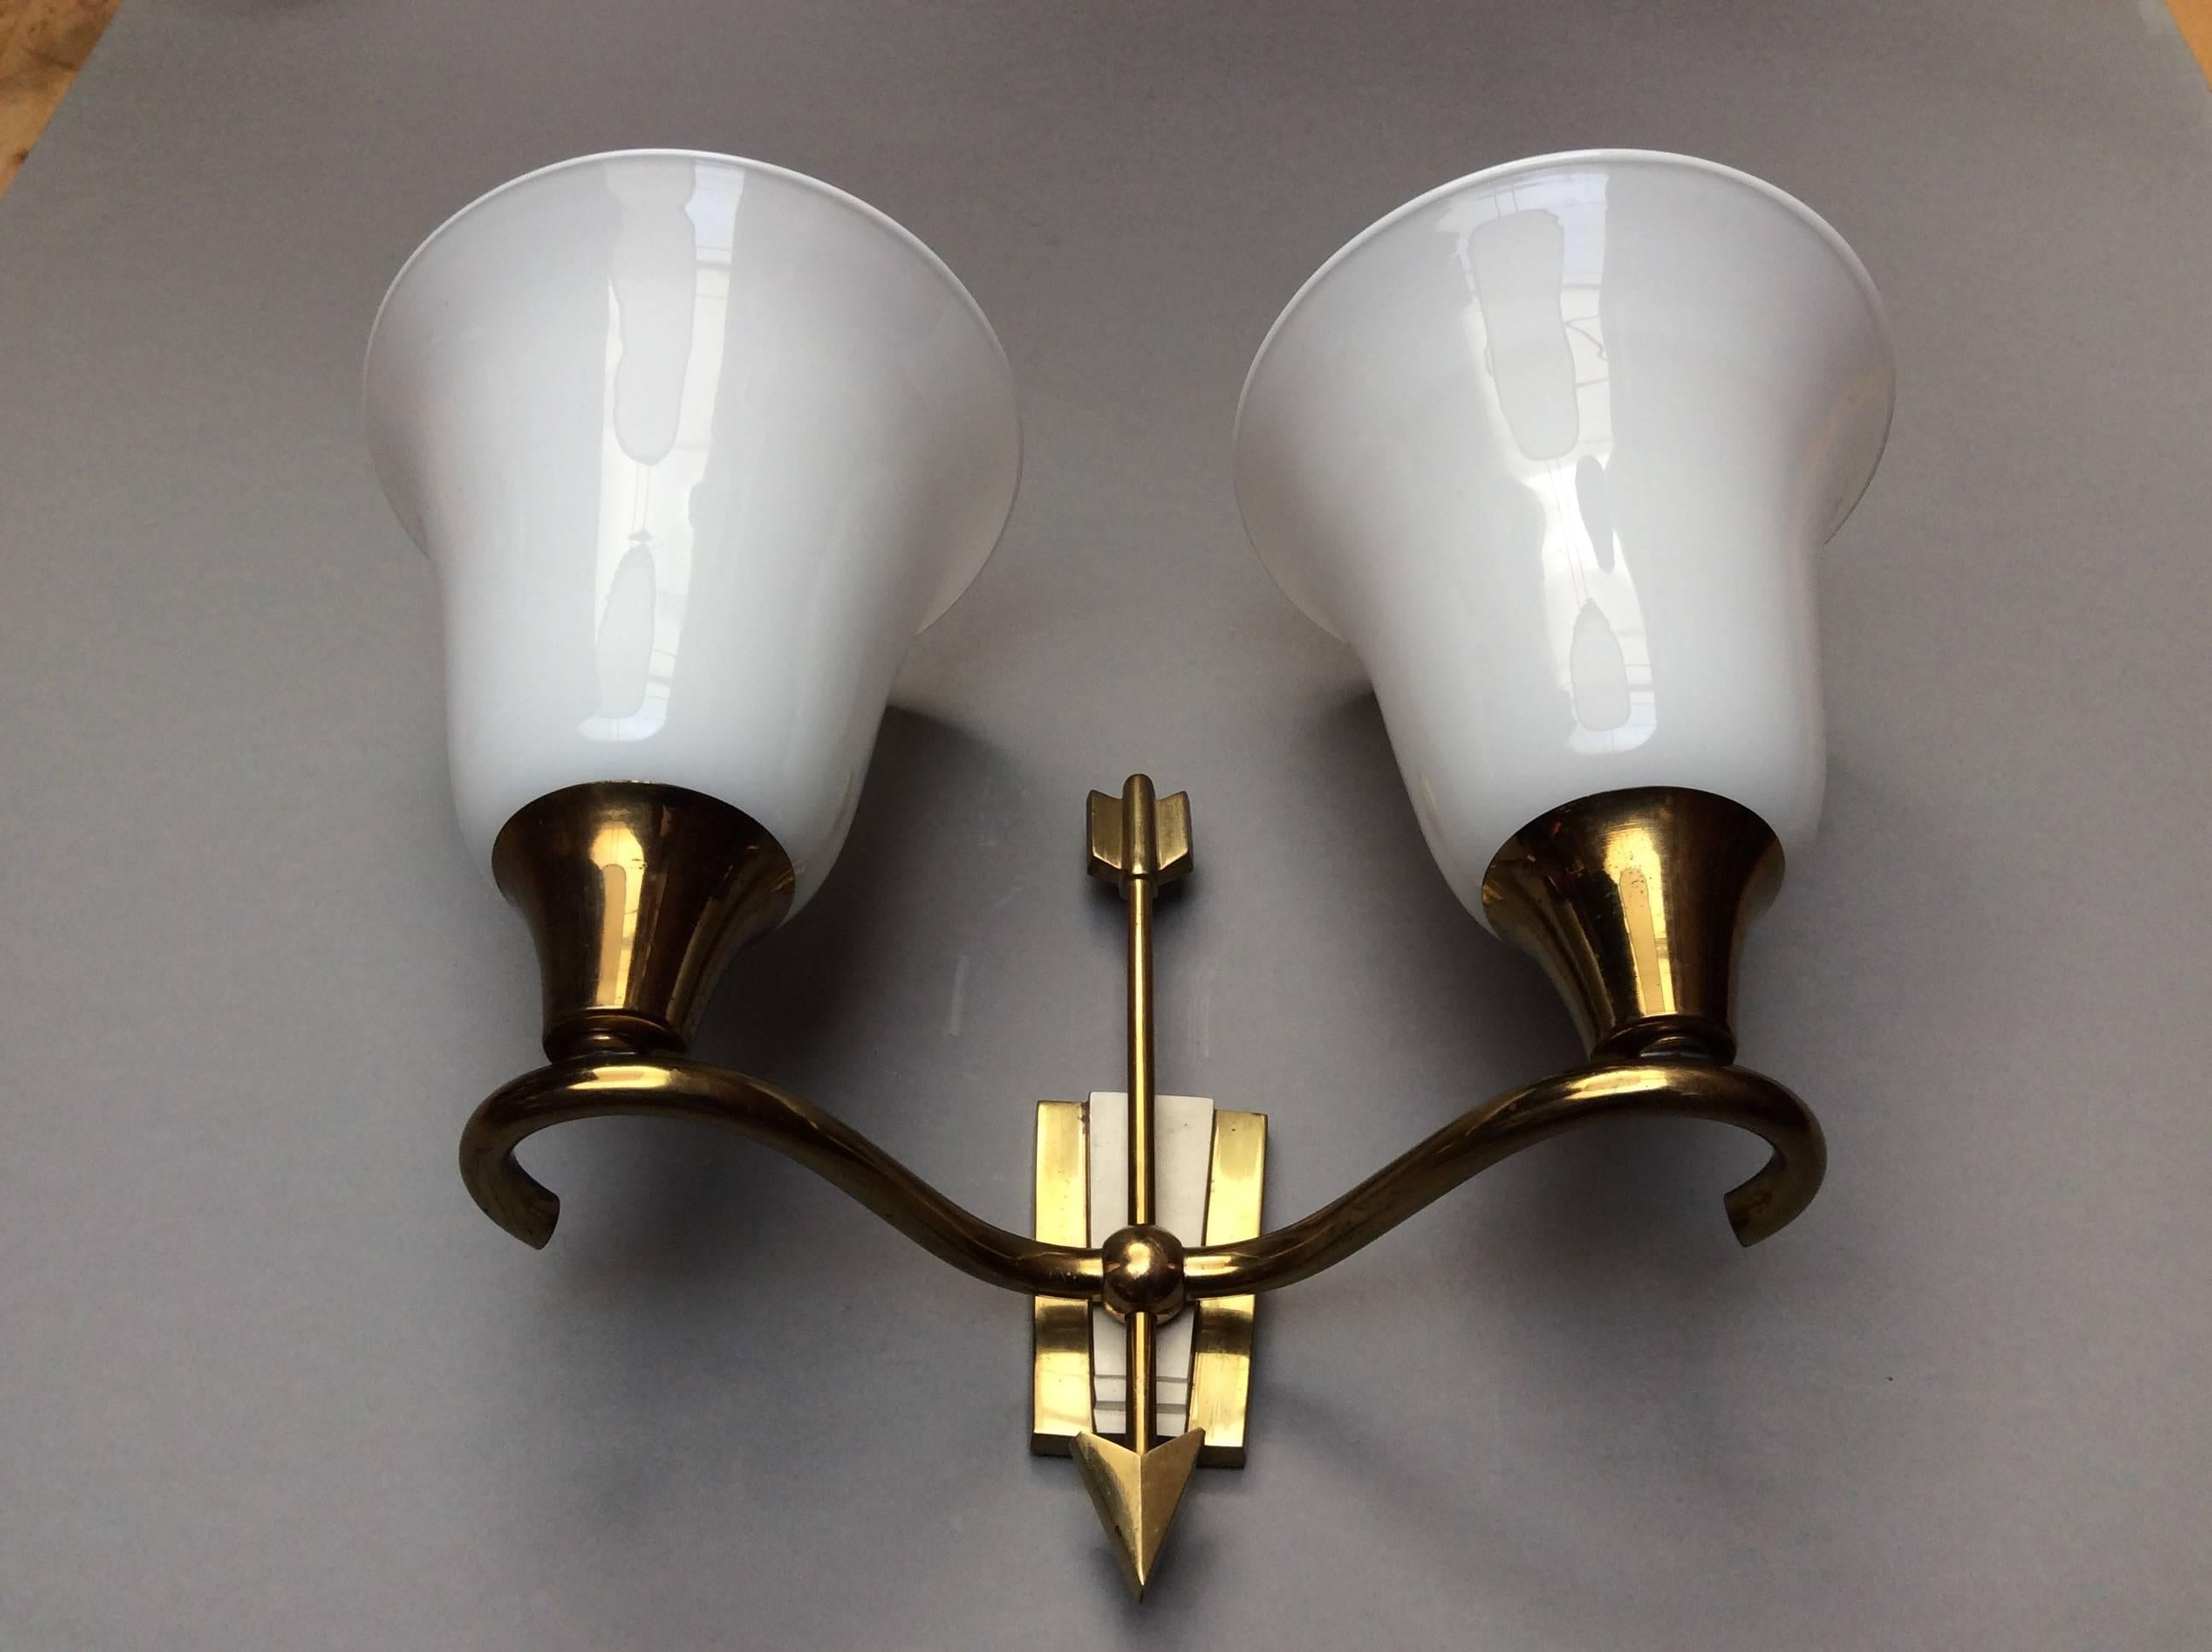 Brass cast structures with two arms and stylized arrows, partially white laquered. Two beautiful Murano blown glass white bolws ich sconce.
The price is for Two sconces.